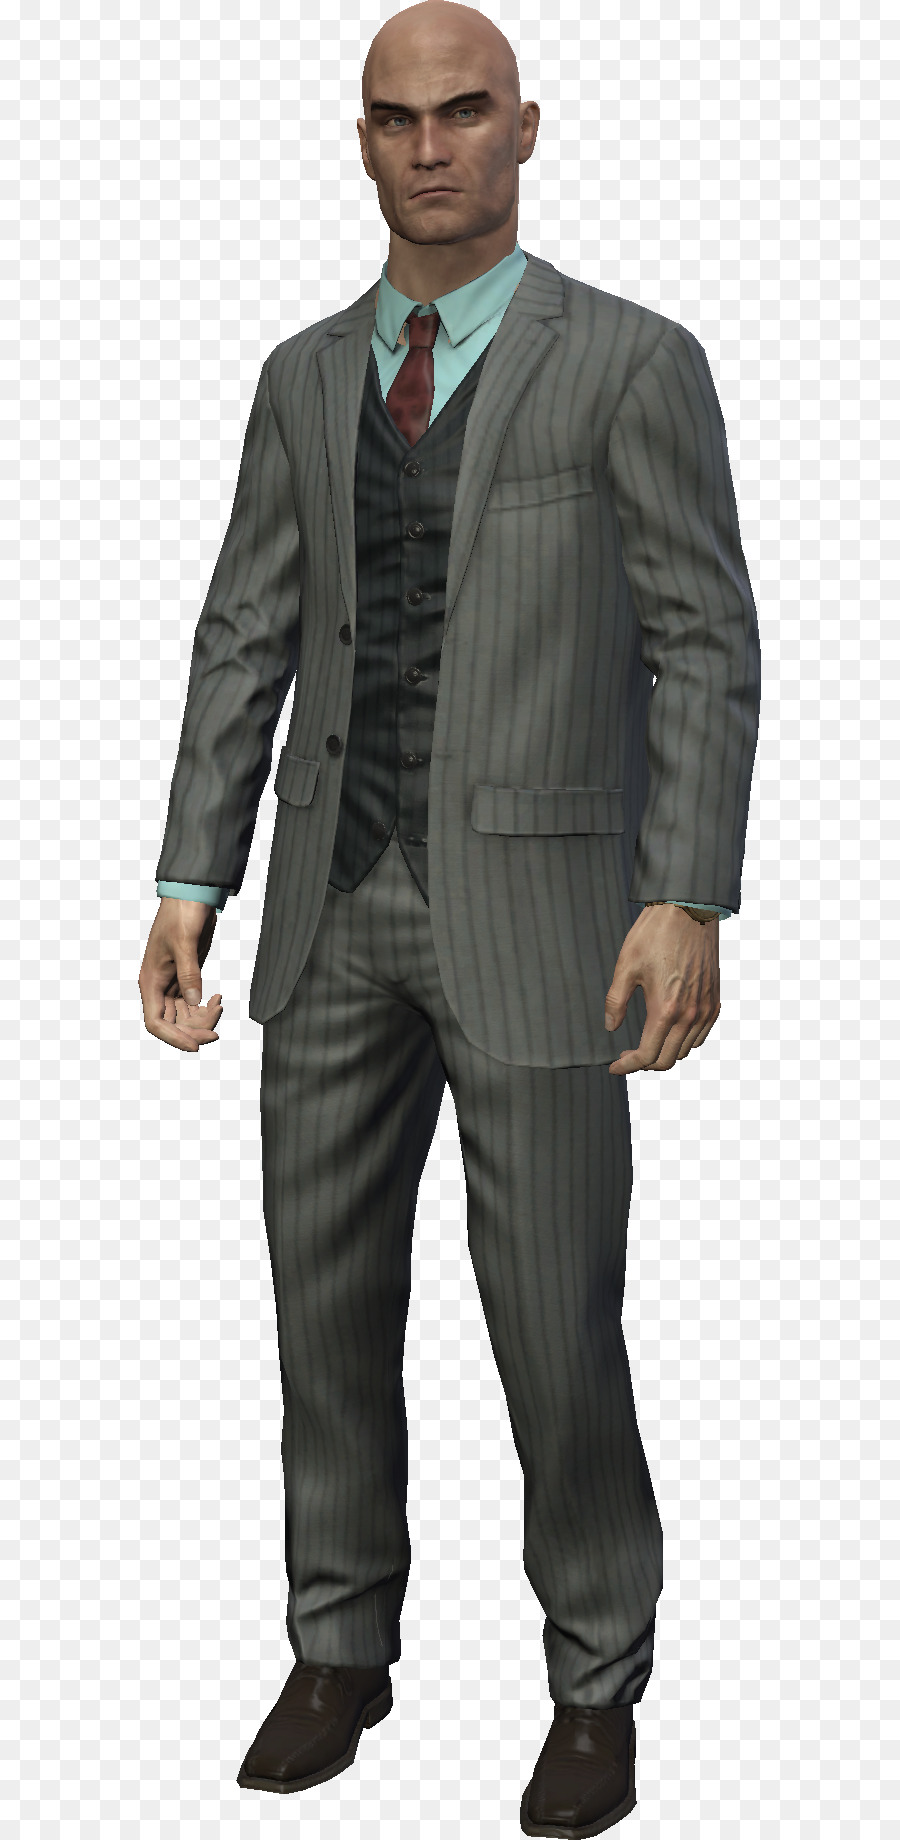 Hitman: Absolution Agent 47 Suit Costume - Hitman png download - 623*1840 - Free Transparent Hitman Absolution png Download.